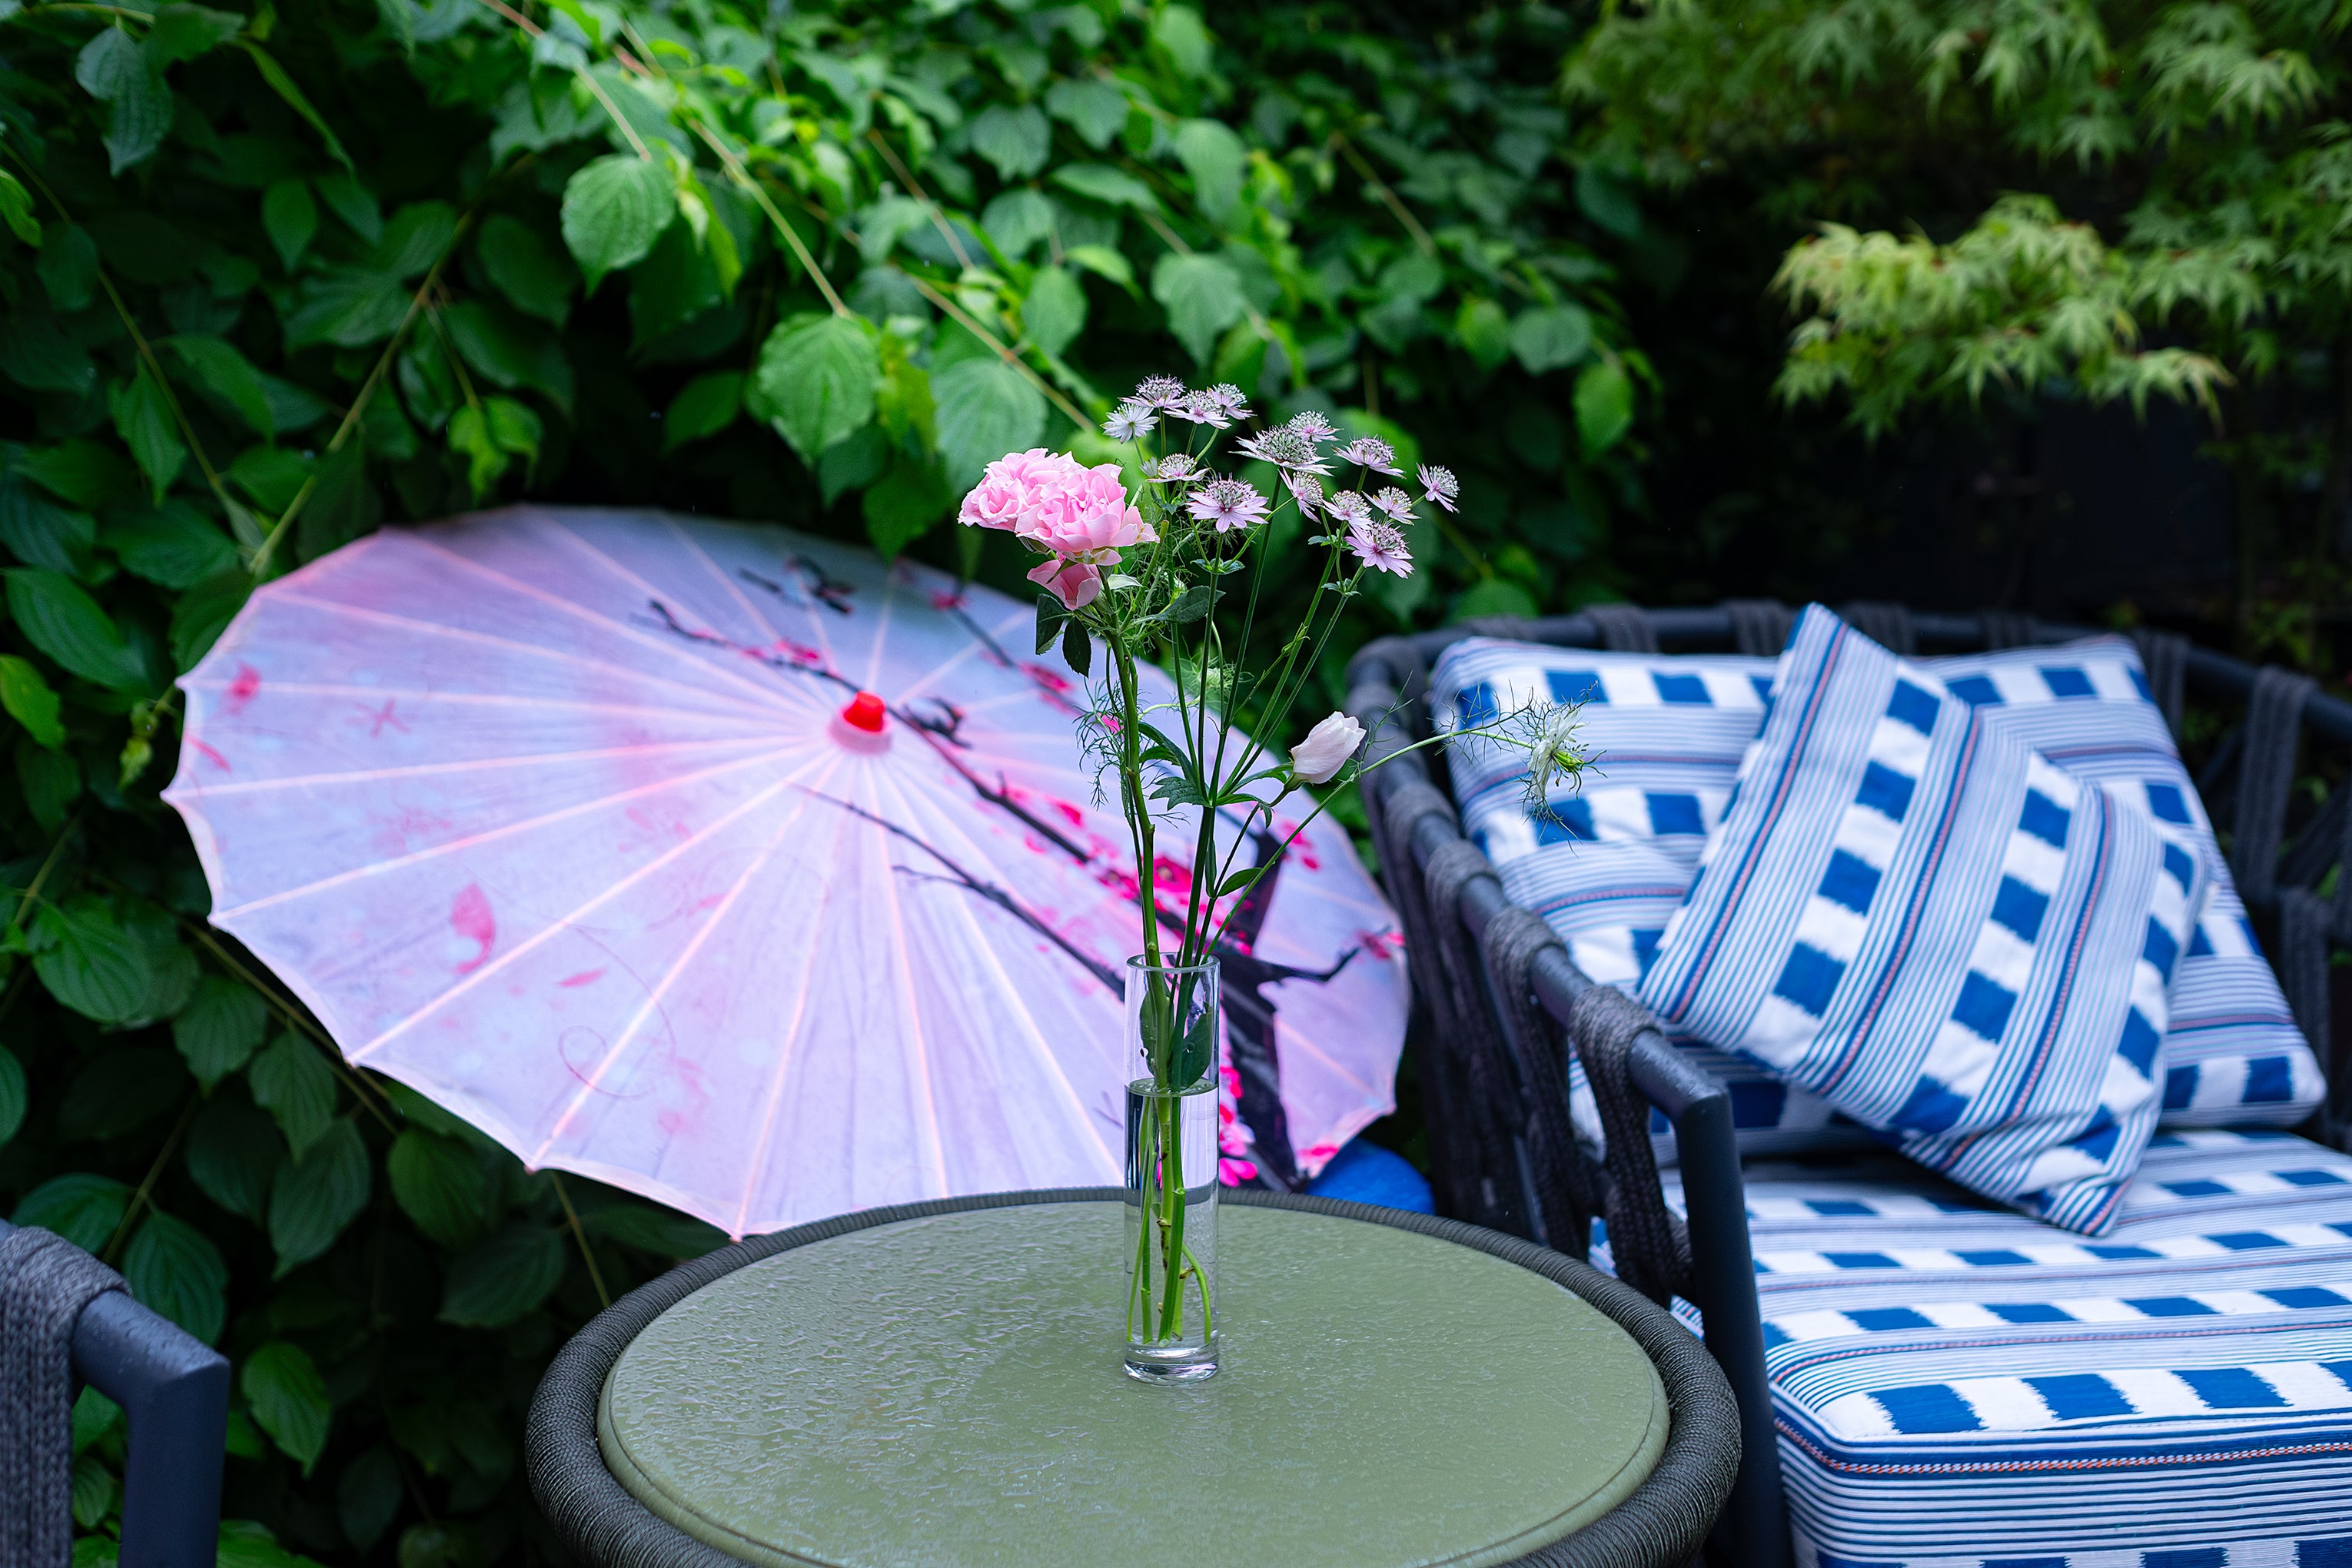 Outdoor terrace decorated with a posy vase of pink and white flowers by Amarante London, adding charm to the Sensai product launch at Beaverbrook Town House.